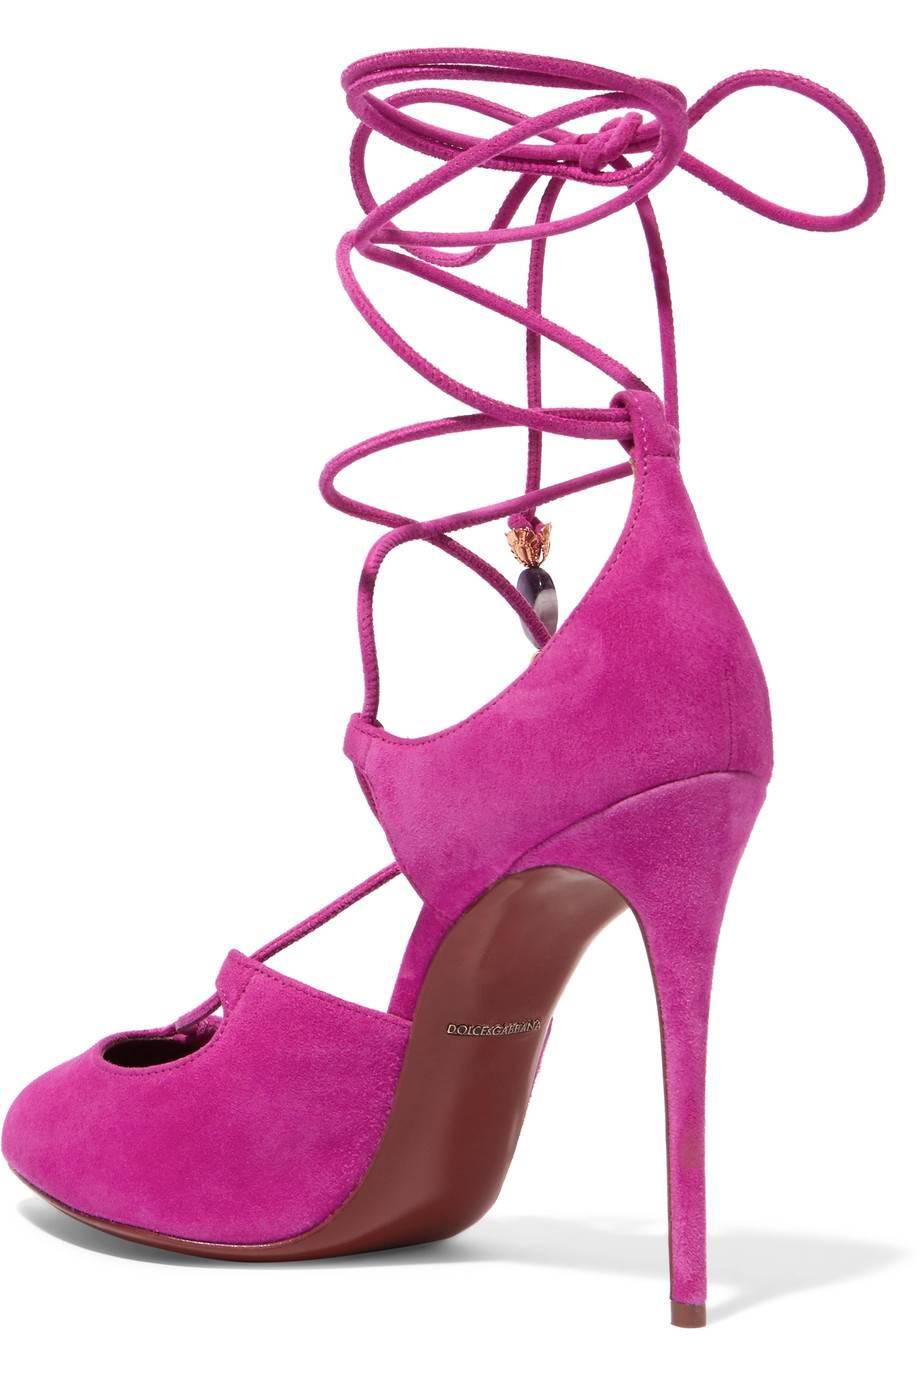 Women's Dolce & Gabbana New Sold Out Pink Suede Pom Pom Evening Heels Pumps in Box